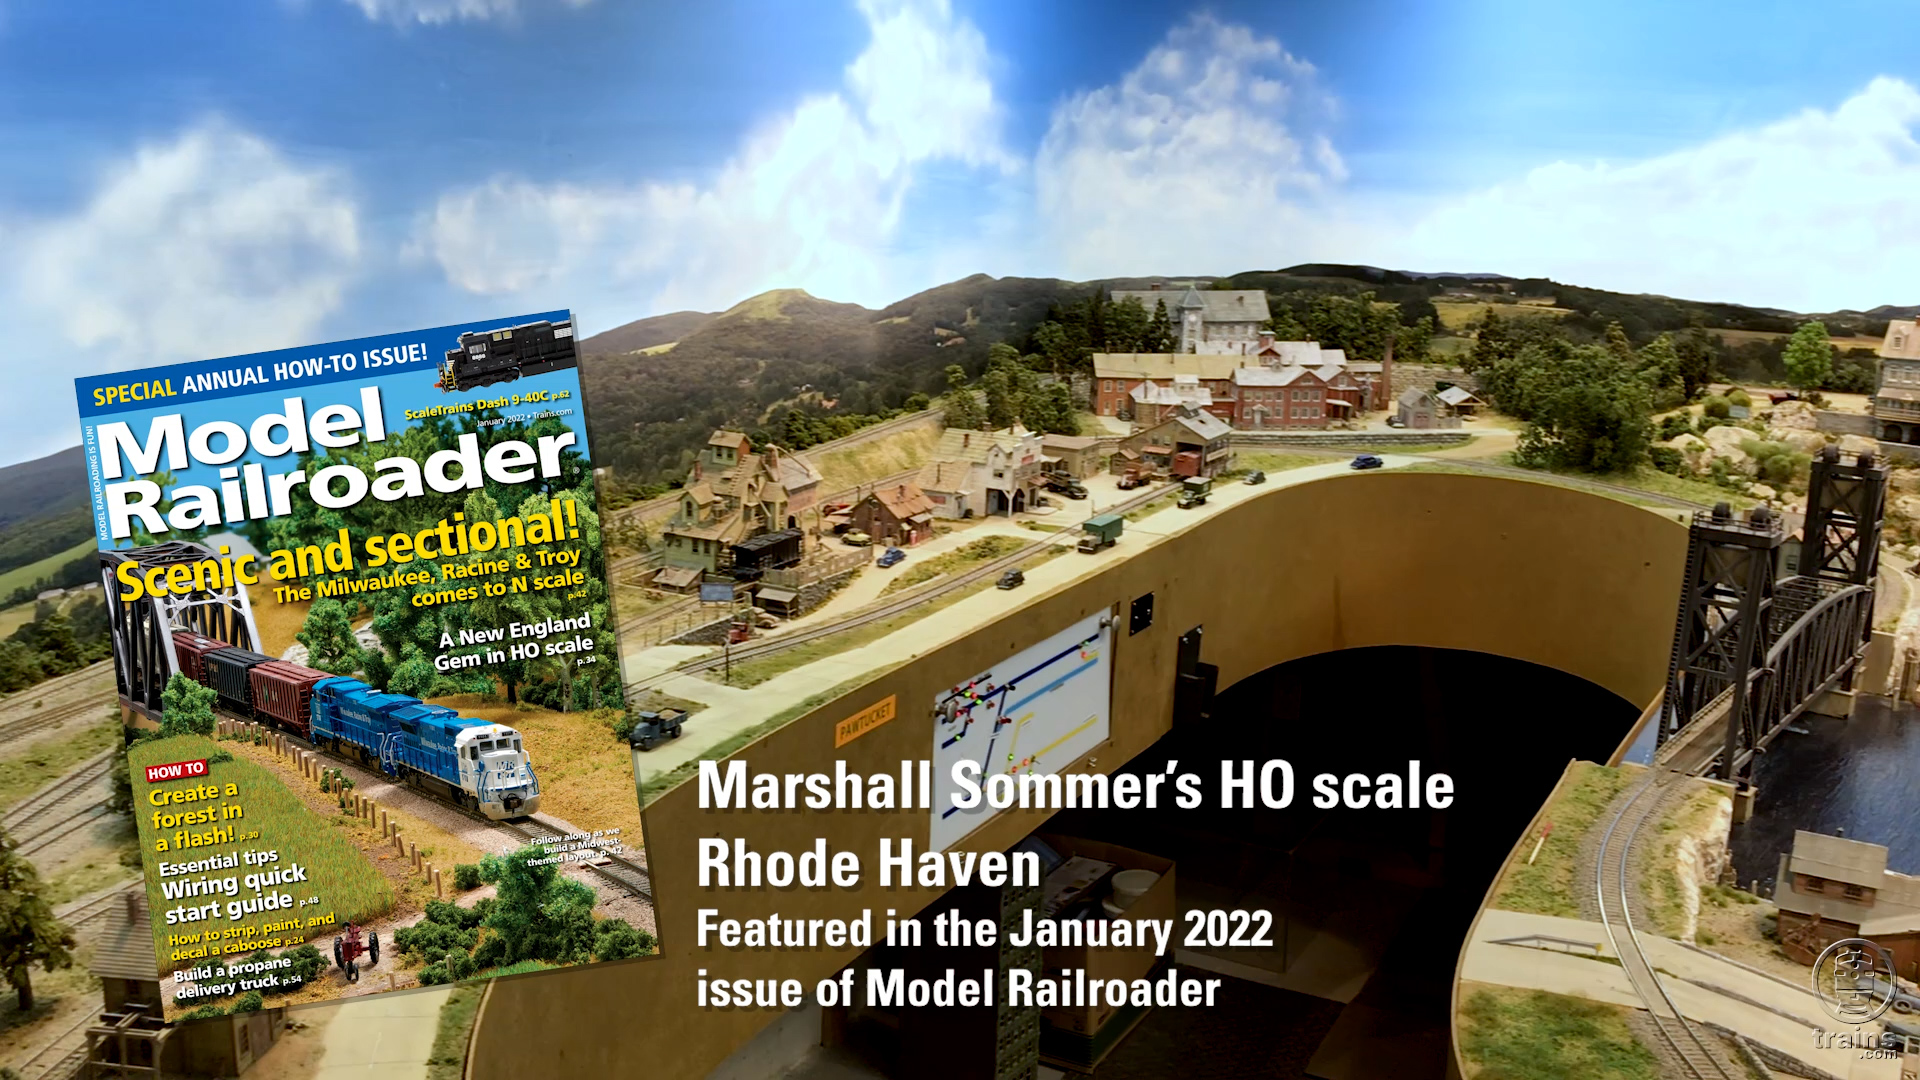 Layout visit: Marshall Sommer’s HO scale Rhode Haven